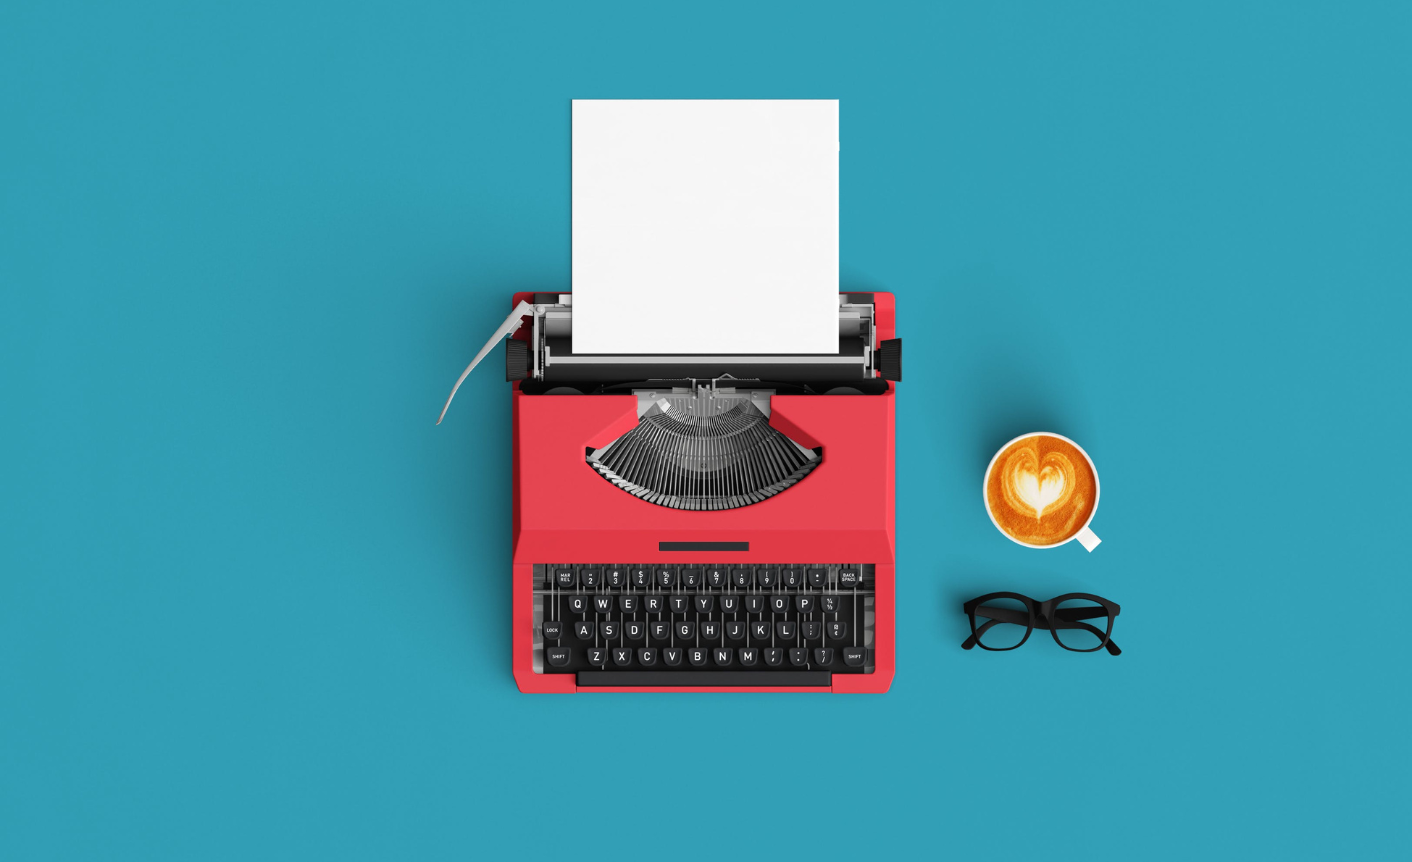 On a blue background is a red typewriter, a cup of coffee, and a pair of glasses to symbolize outsourced writers.